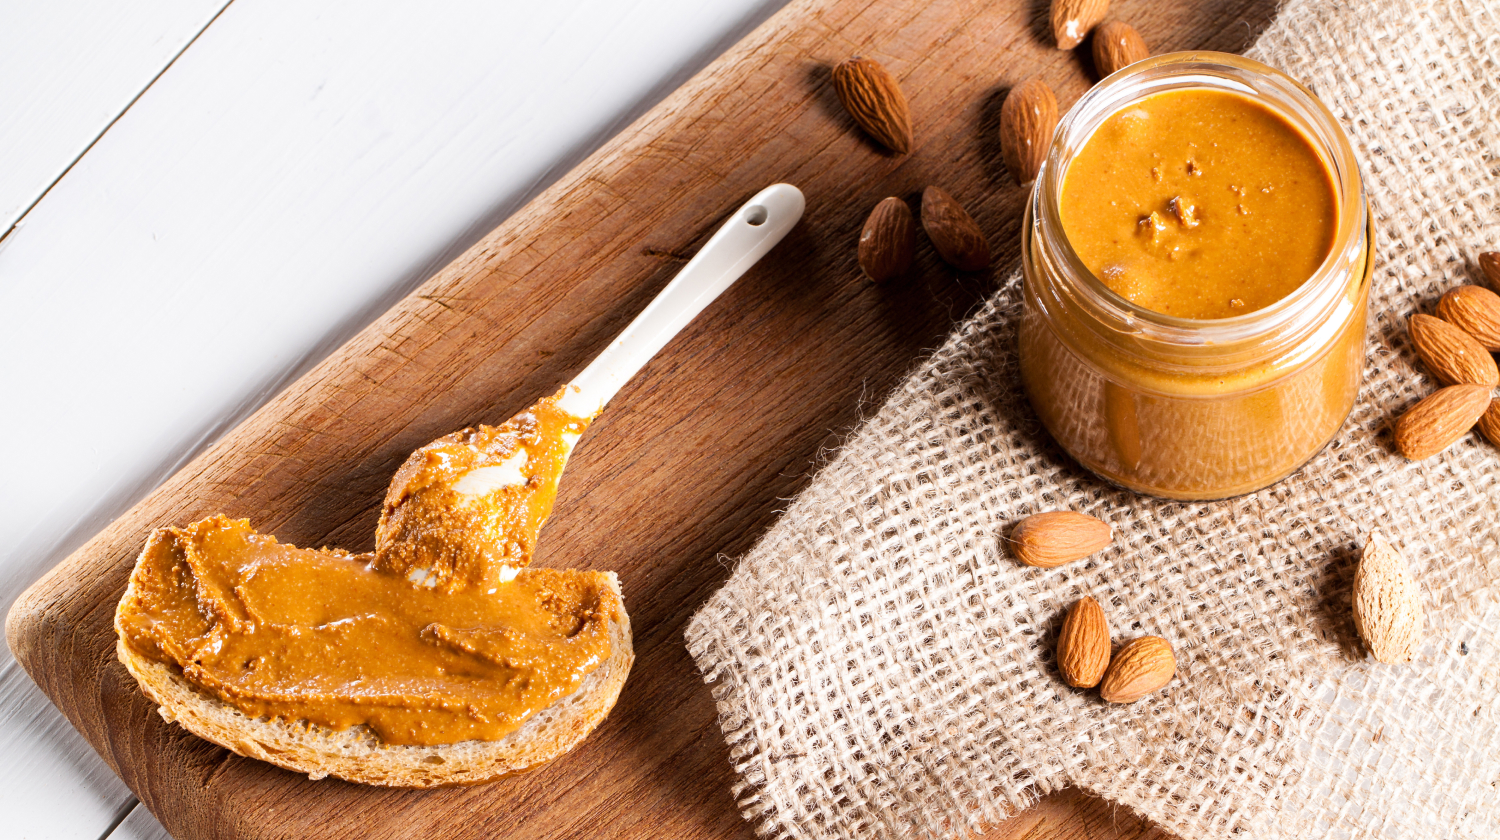 is peanut butter good for weight gain